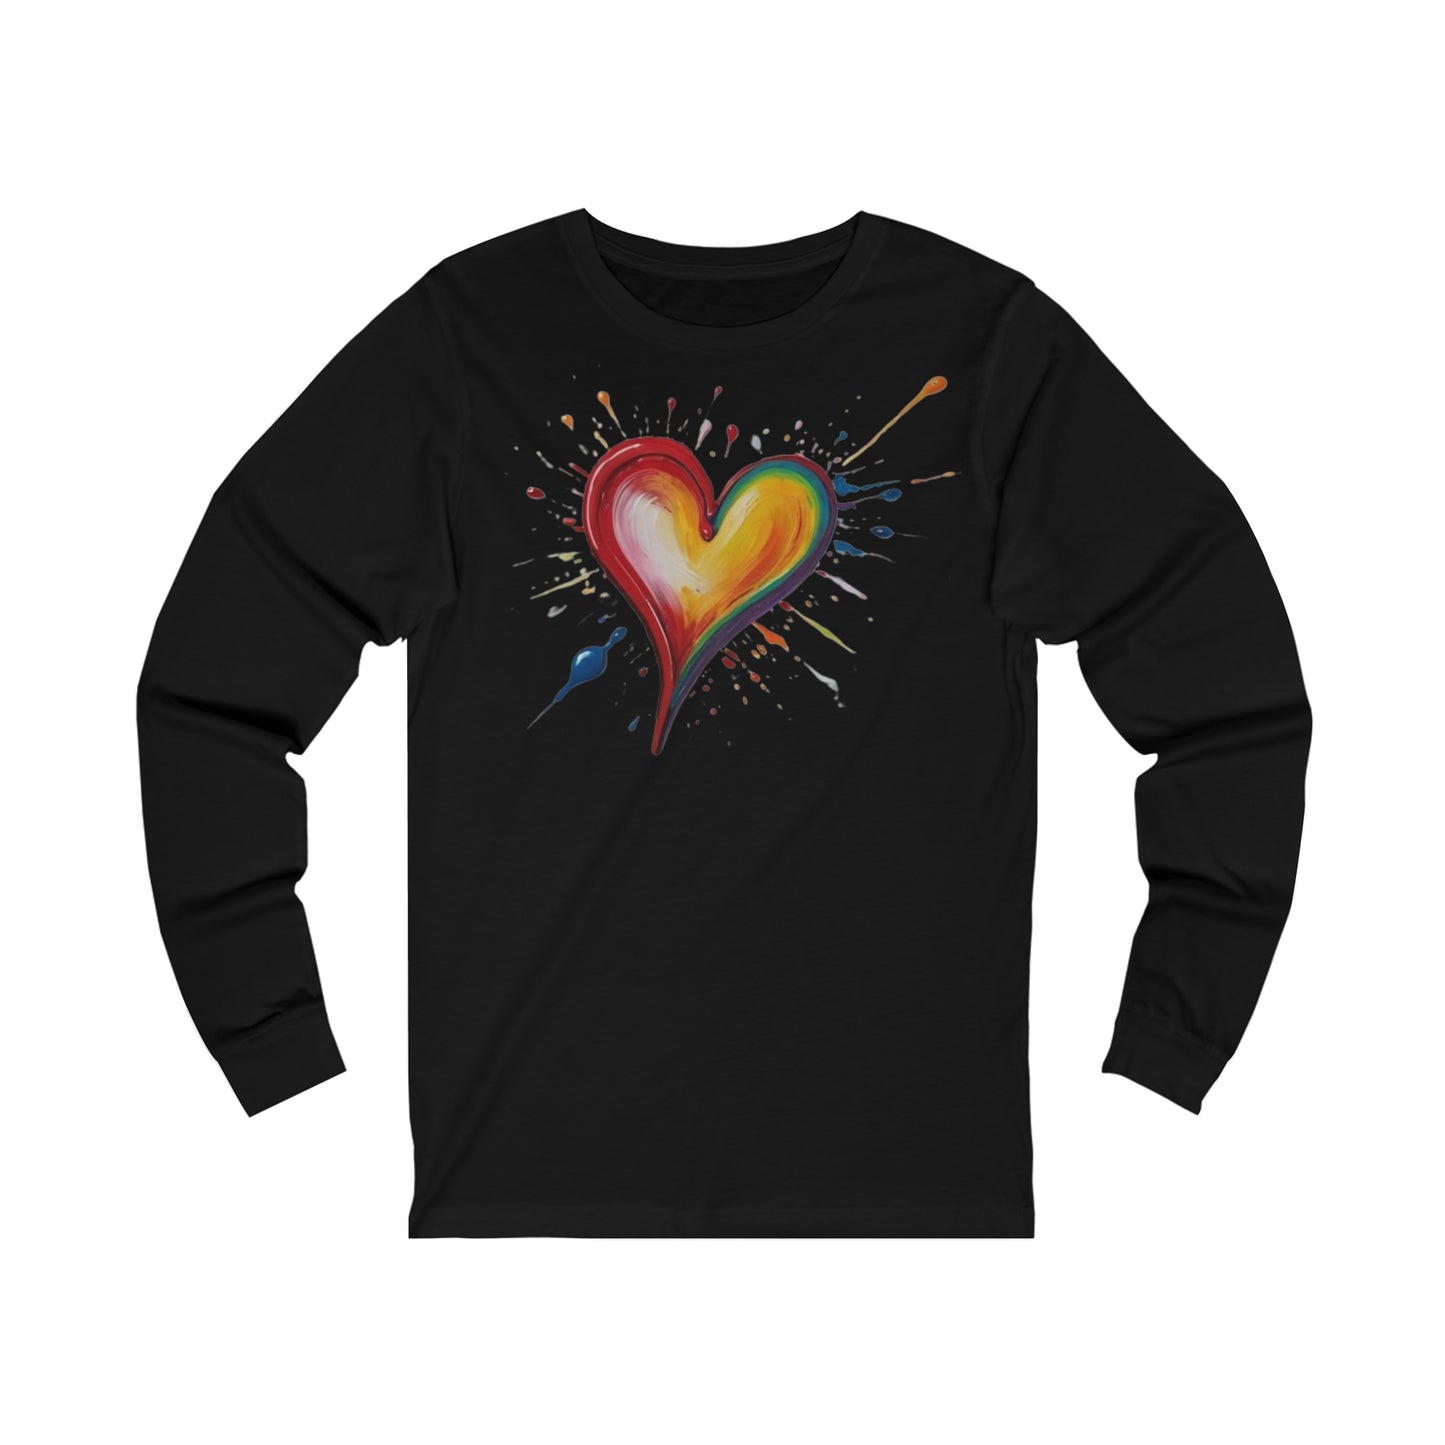 Messy Painted Colourful Slanted Love Heart - Unisex Jersey Long Sleeve Tee